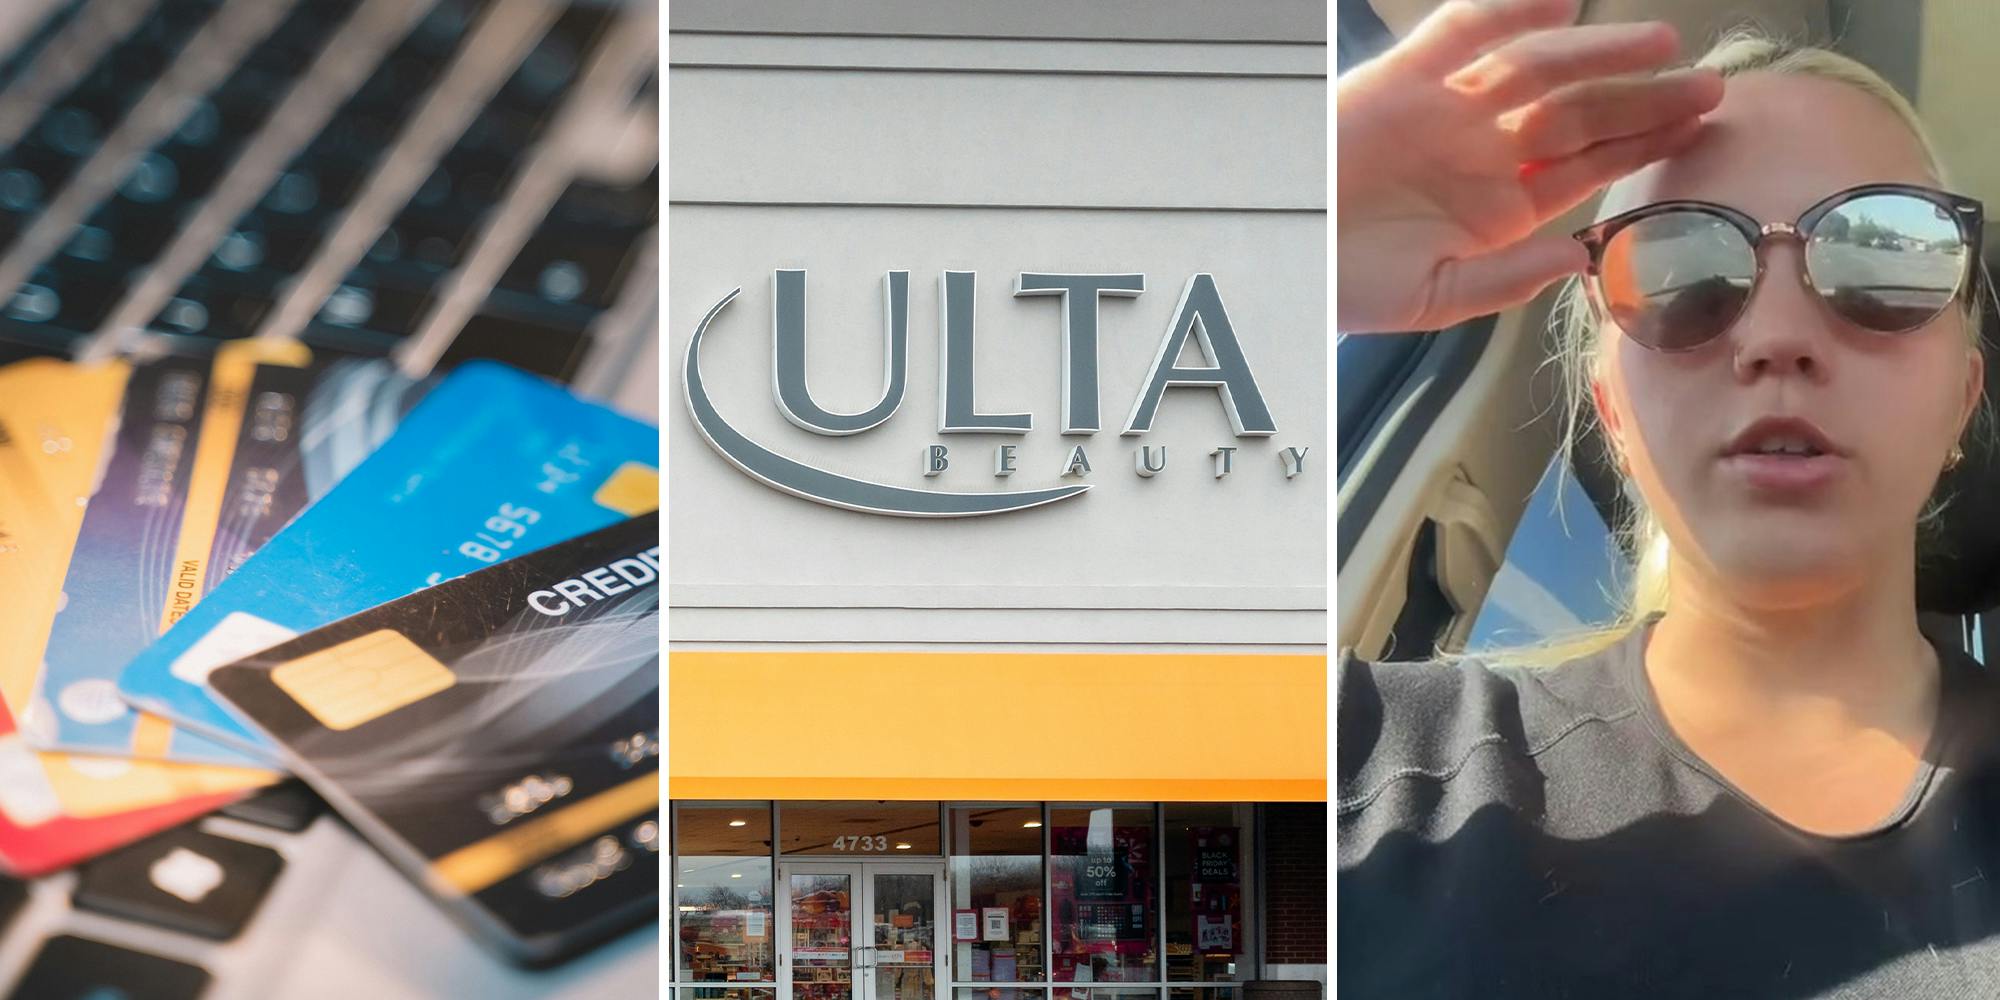 ‘What are the managers doing to you guys?’: Ulta customer says workers ganged up on her, wouldn’t take no for an answer when trying to get her to sign up for credit card